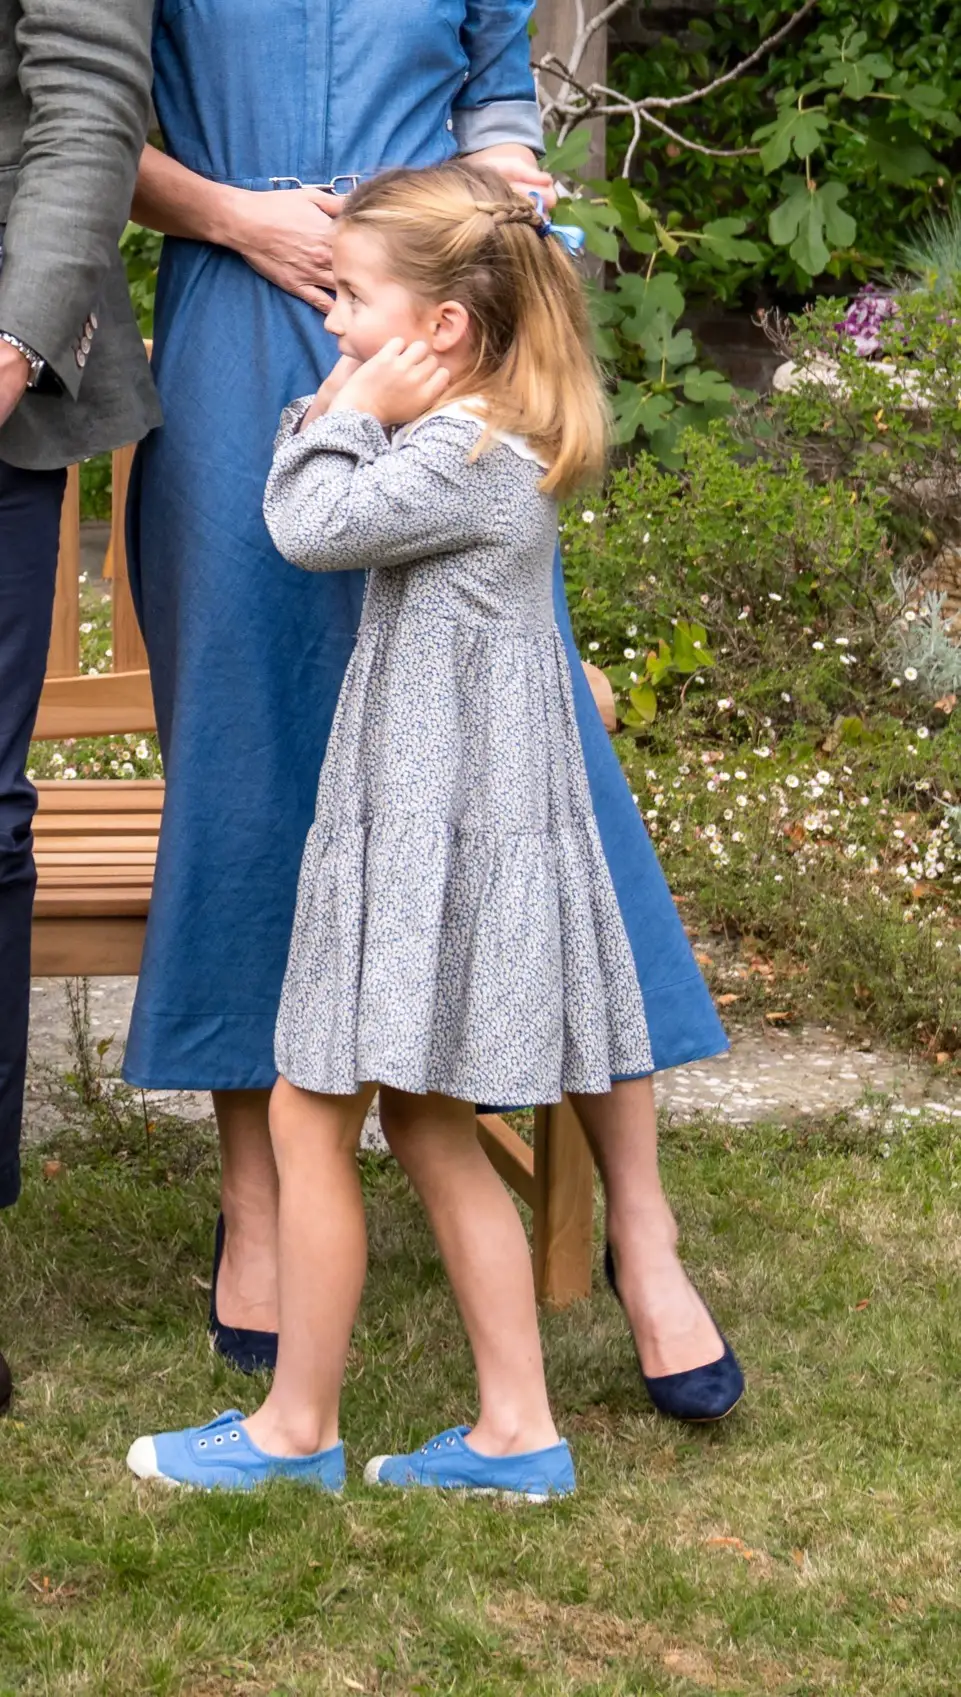 Princess Charlotte was really excited to meet Sir David Attenborough